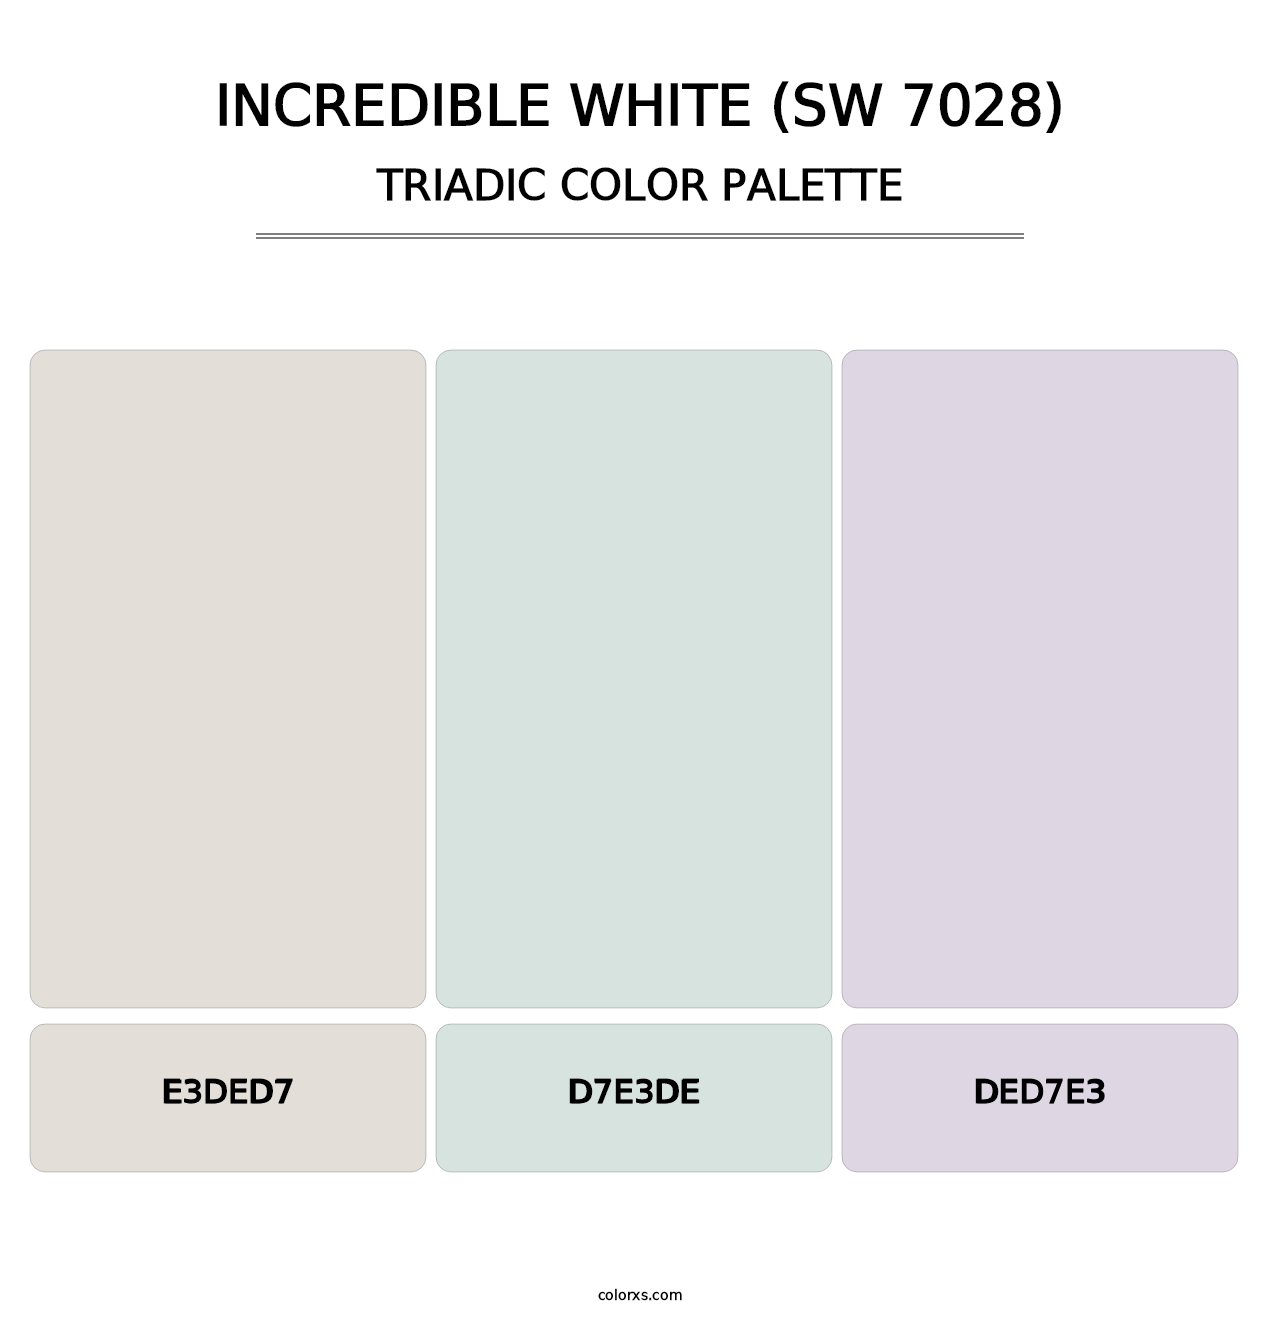 Incredible White (SW 7028) - Triadic Color Palette